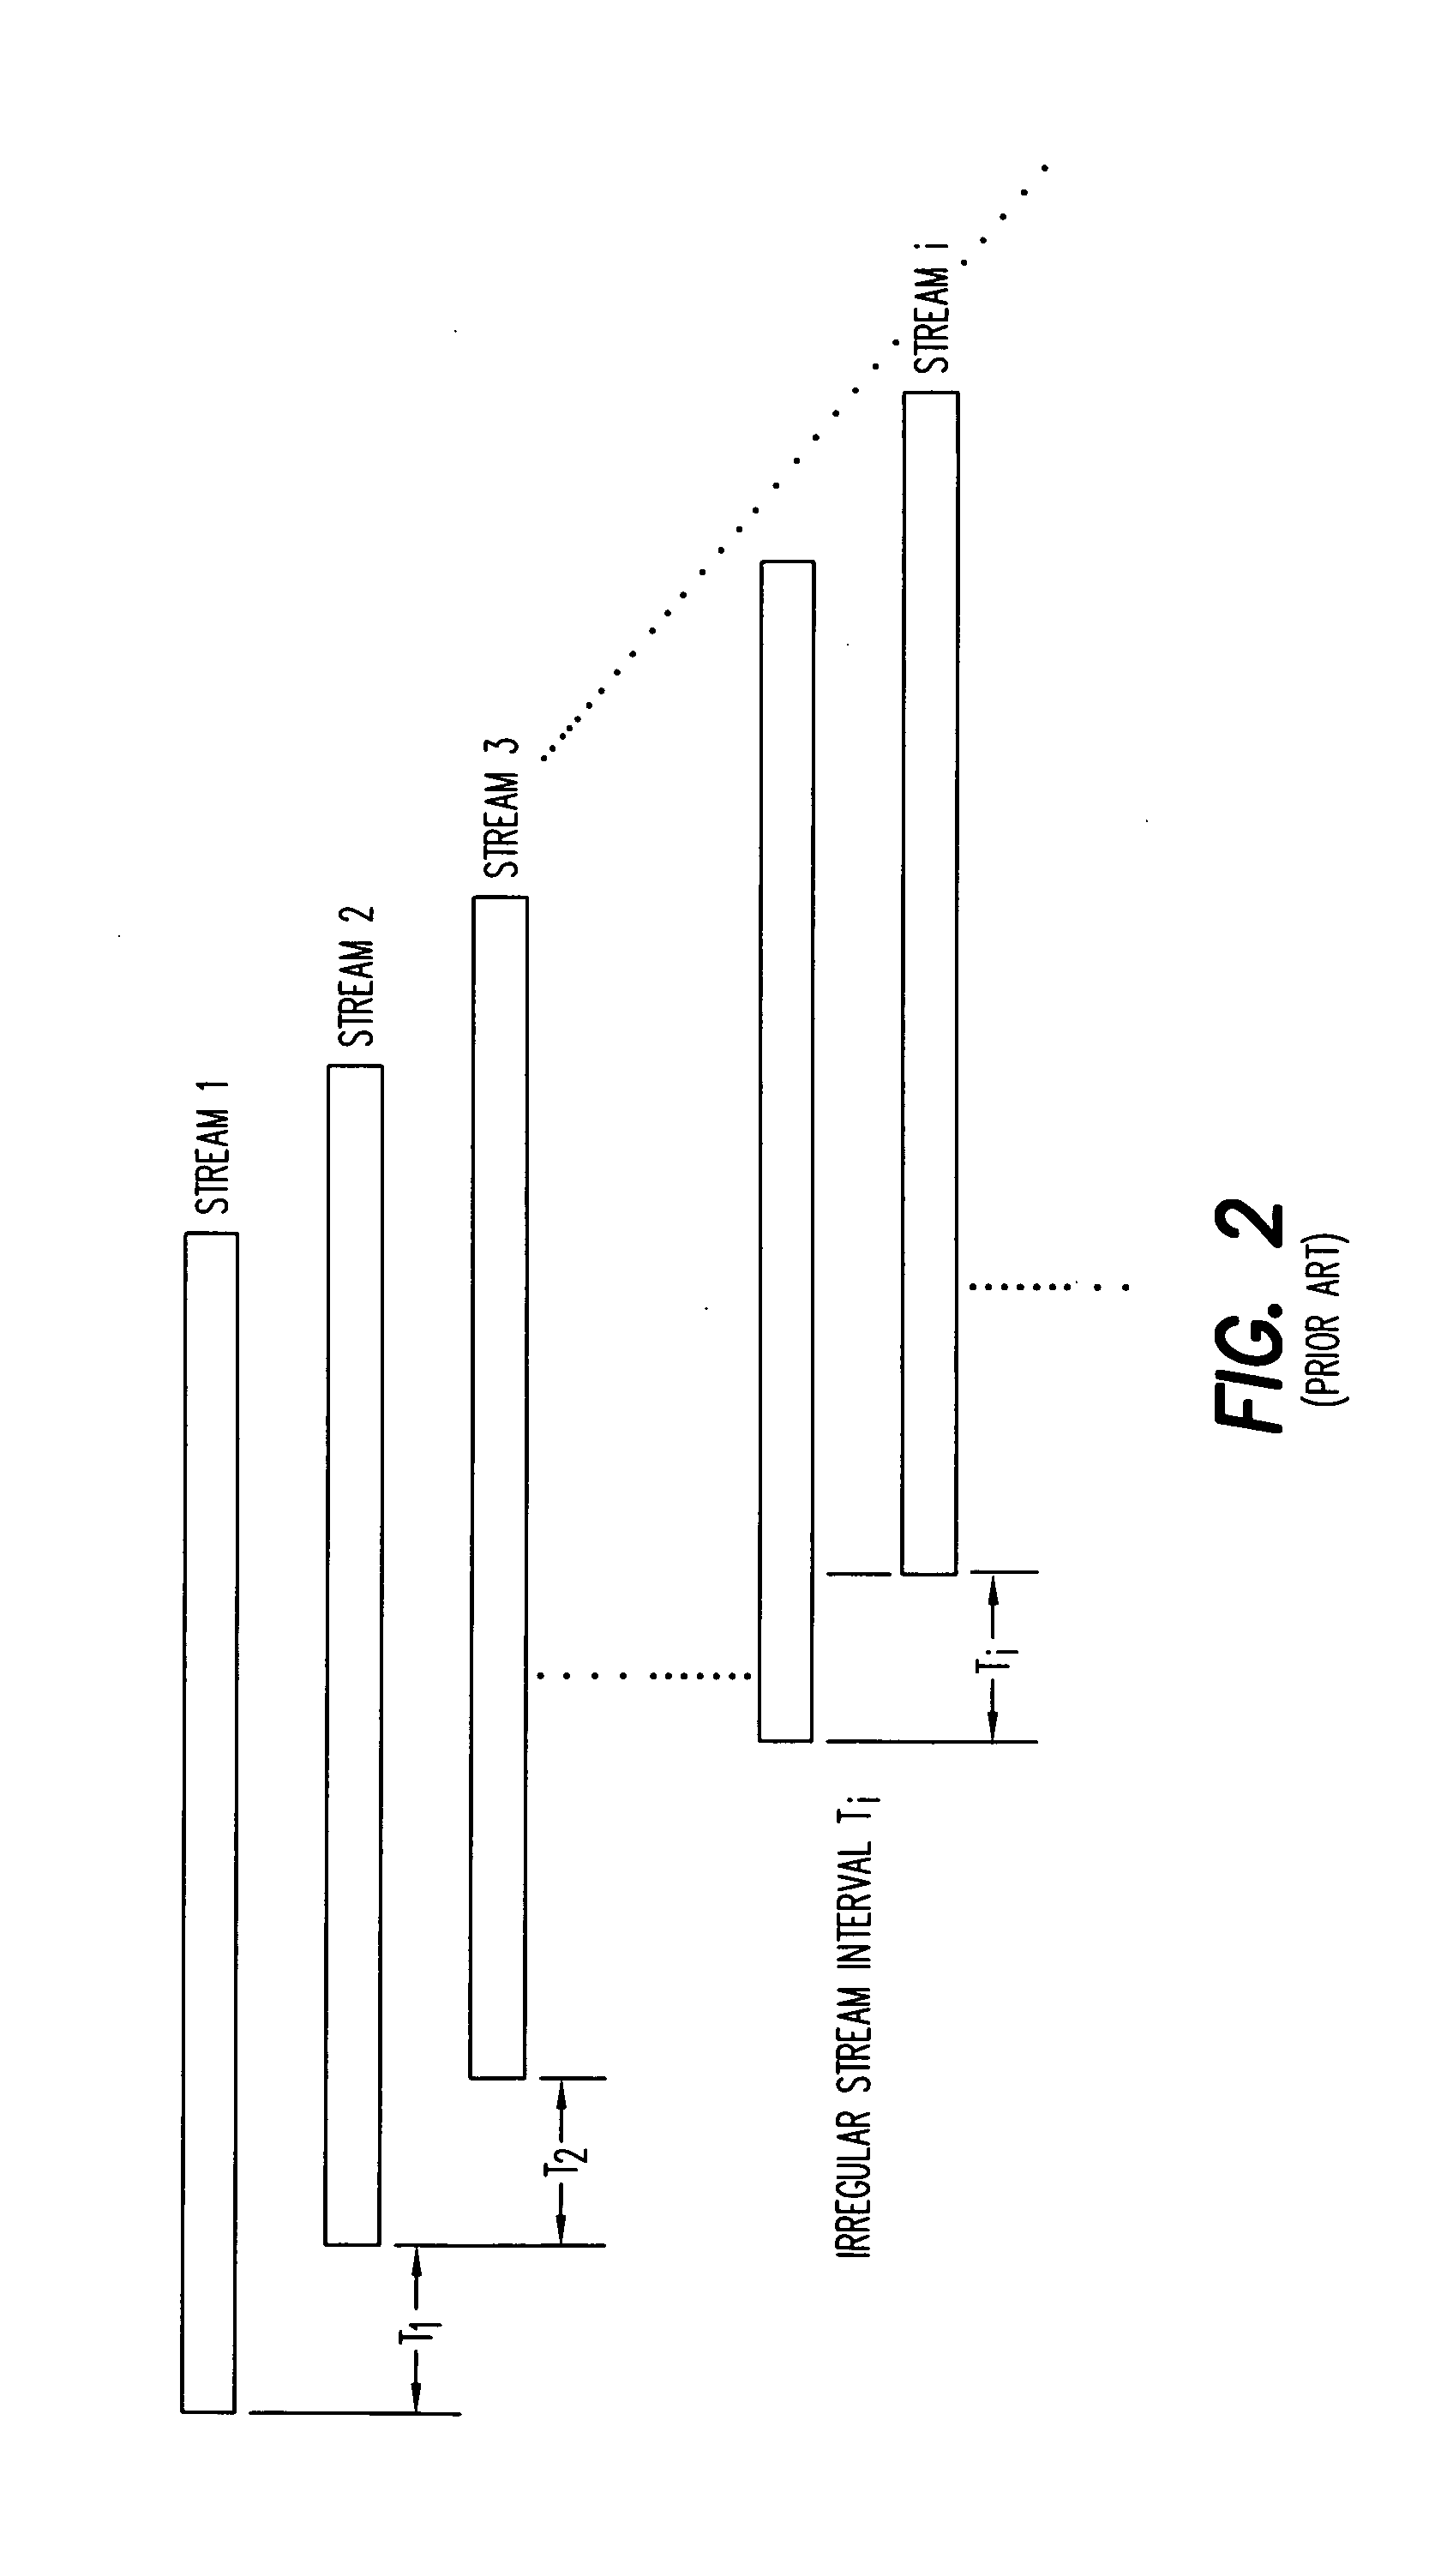 Method for delivering large amounts of data with interactivity in an on-demand system